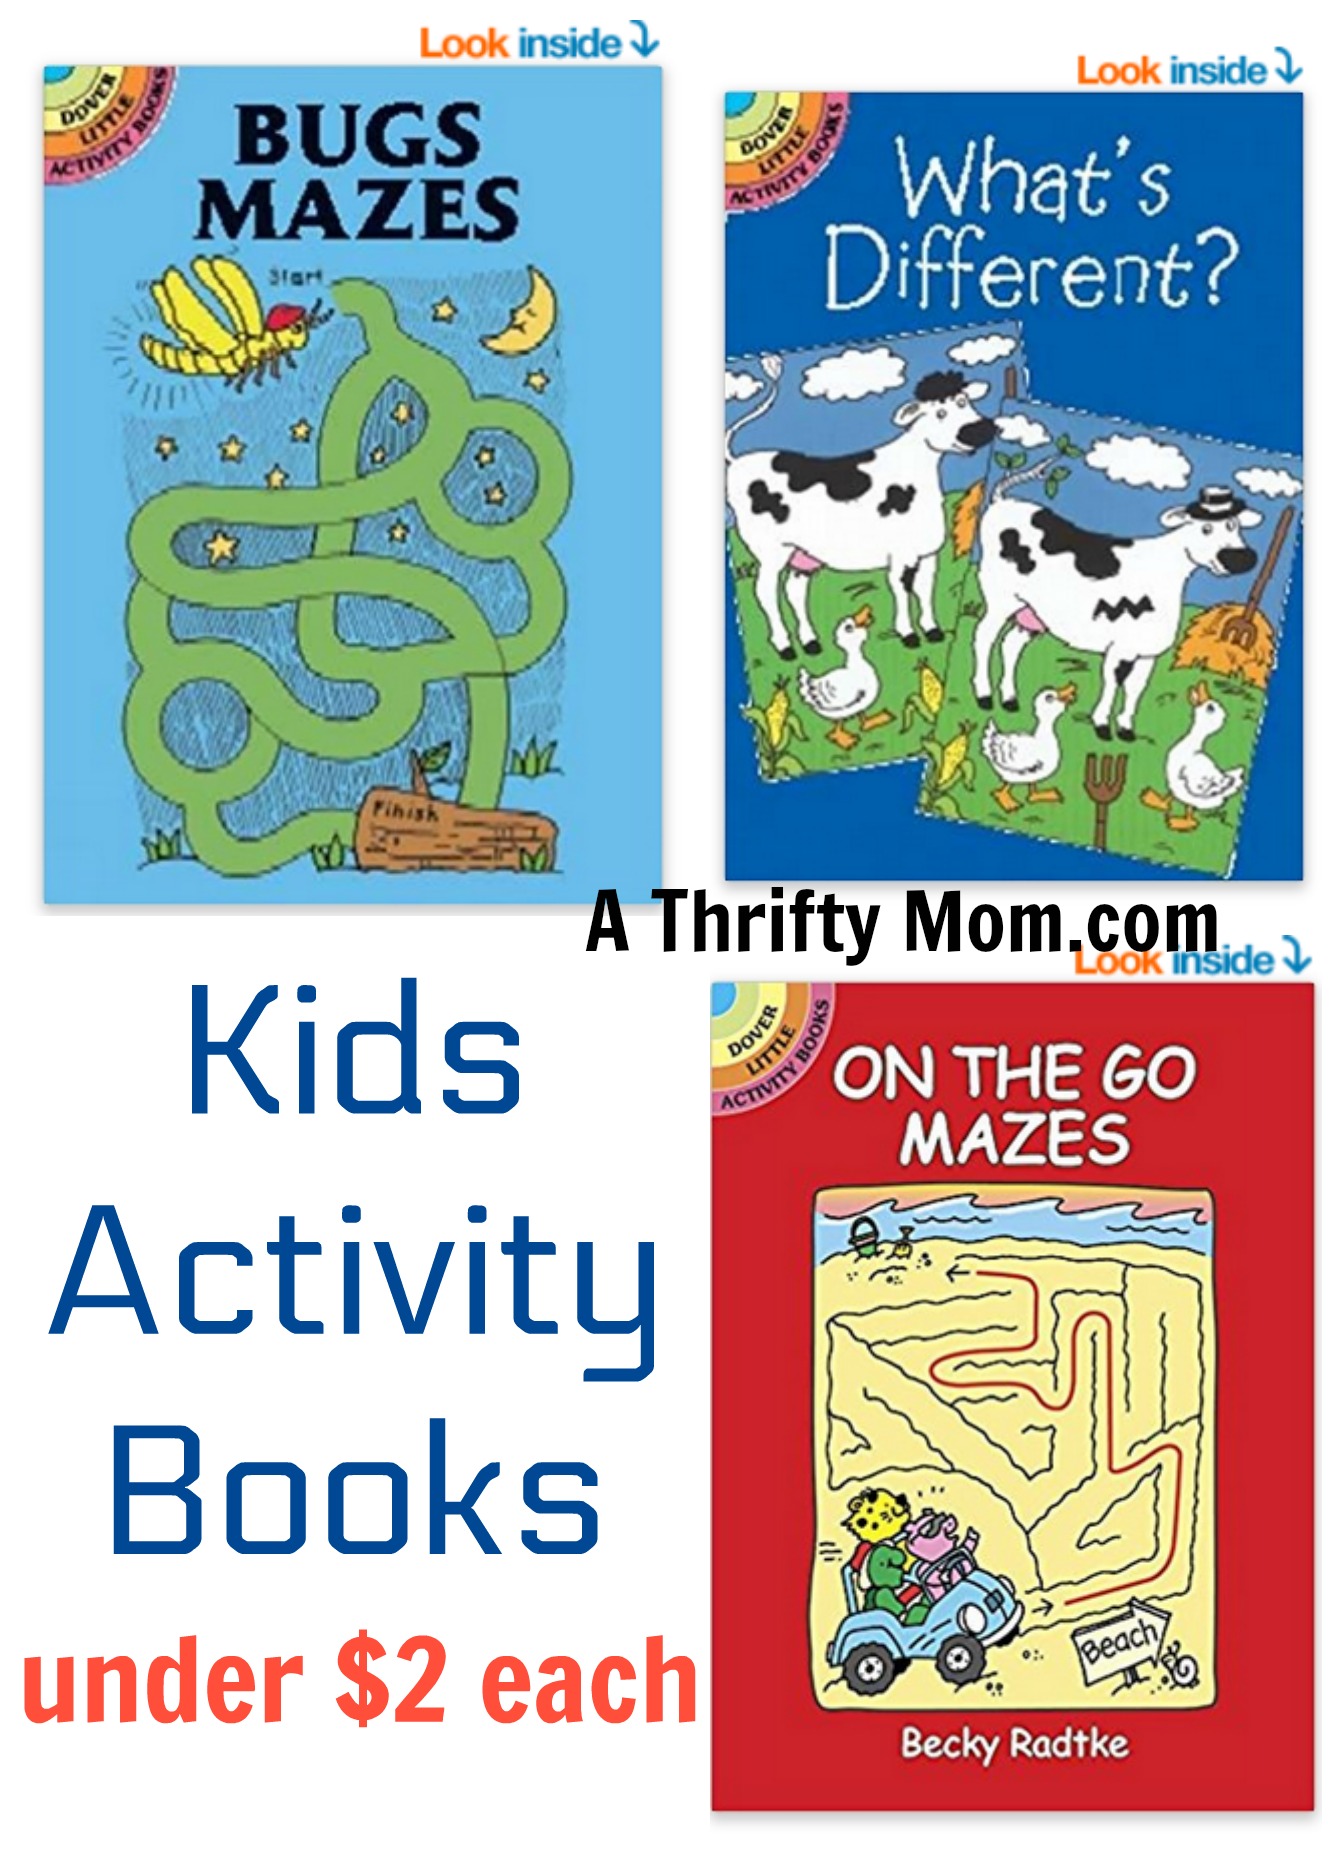 kids-activity-books-a-thrifty-mom-recipes-crafts-diy-and-more